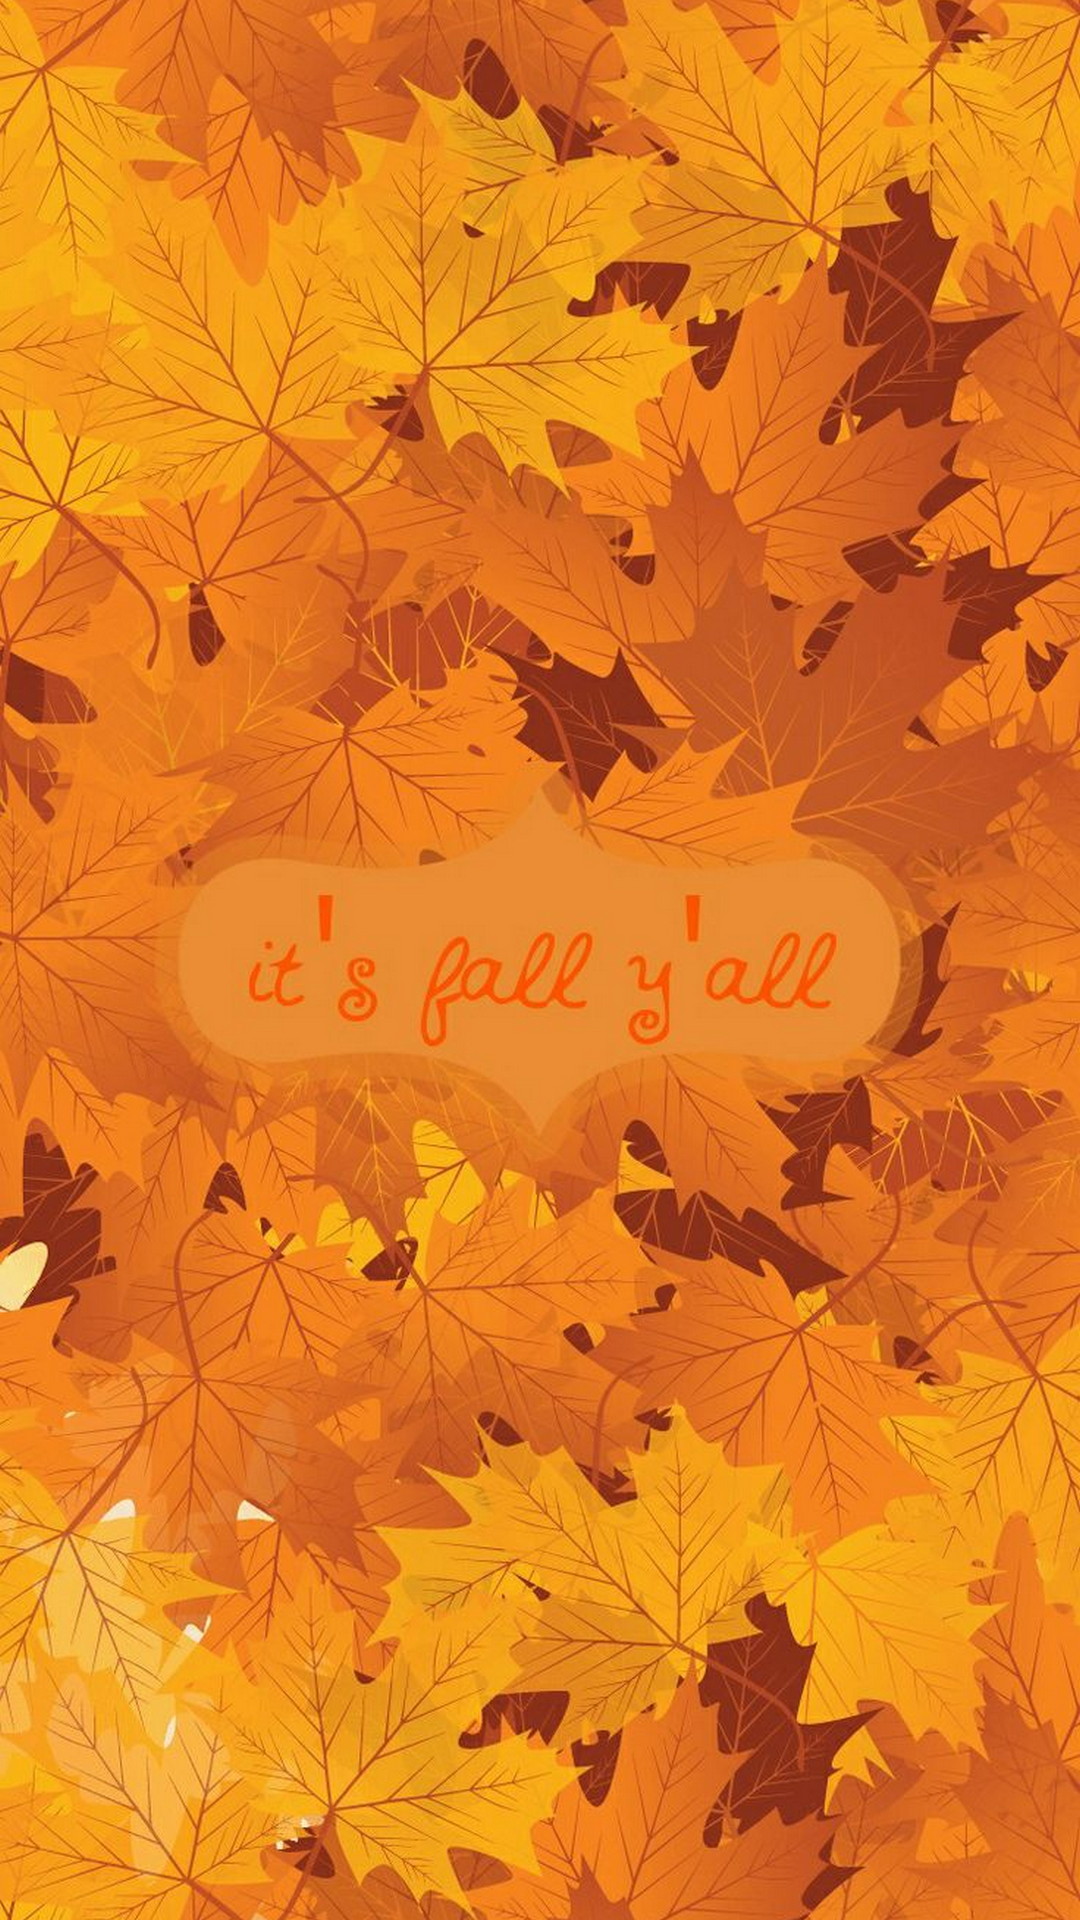 iPhone 13 Wallpaper Fall With high-resolution 1080X1920 pixel. You can use this wallpaper for your iPhone 5, 6, 7, 8, X, XS, XR backgrounds, Mobile Screensaver, or iPad Lock Screen